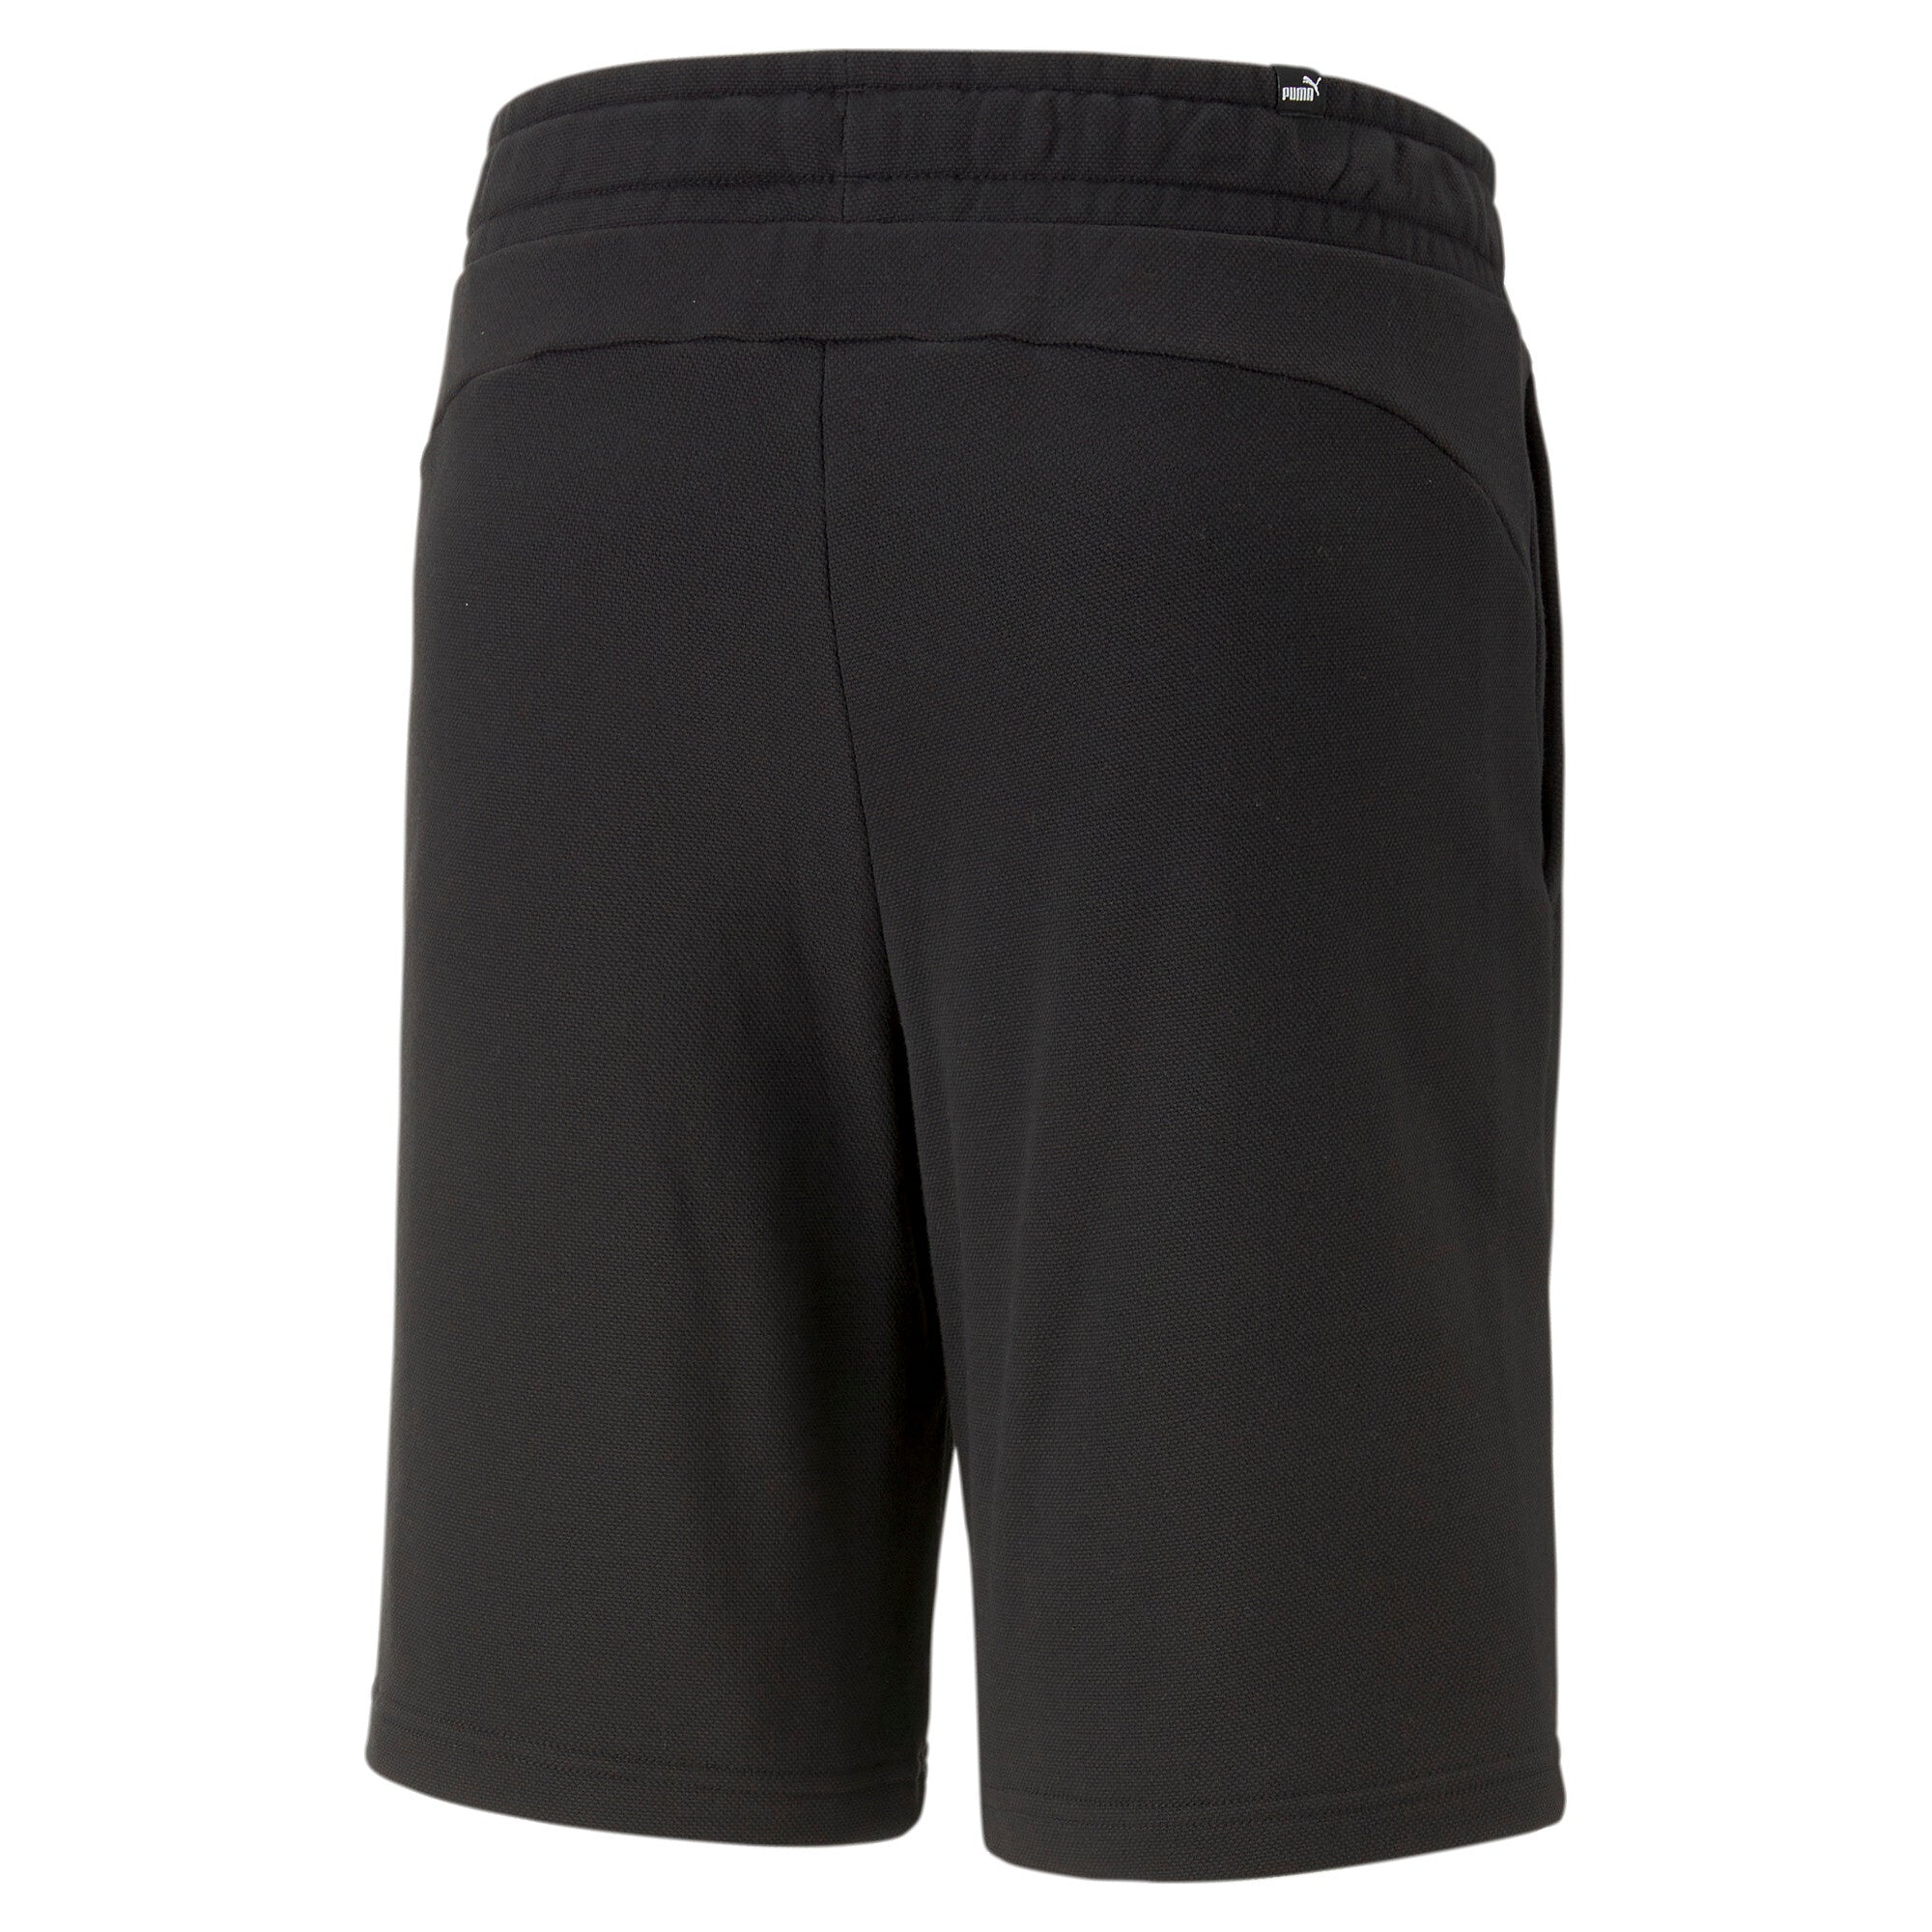 MENS ESS ELEVATED SHORTS - 67339001